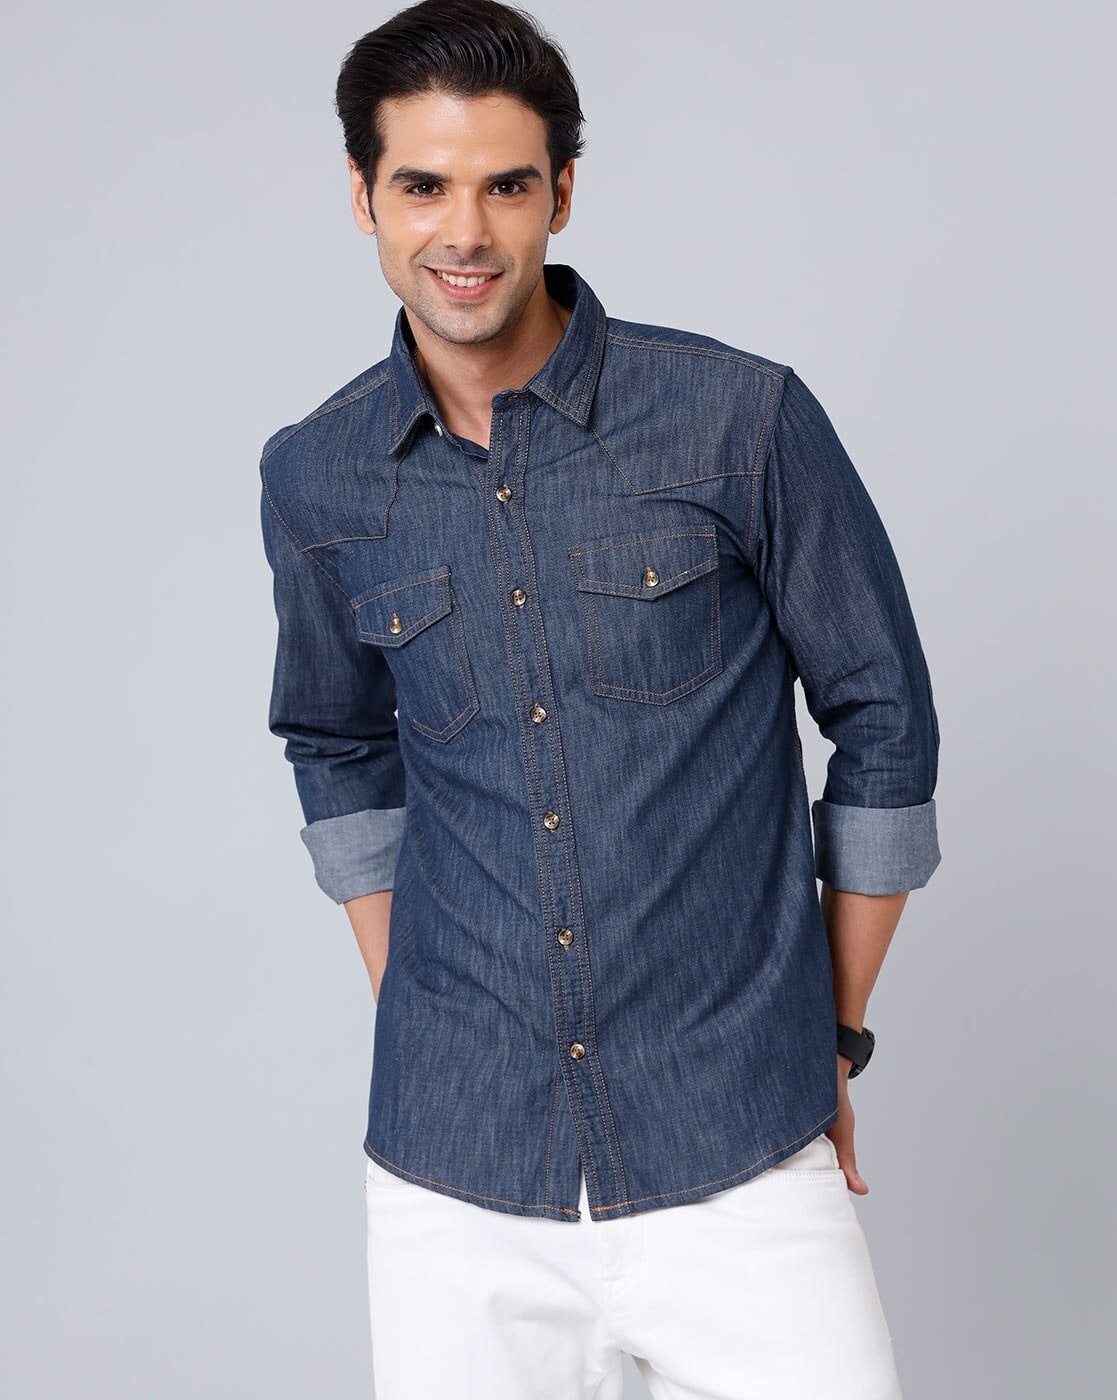 Buy Noggah Solid Blue Full-Sleeves Classic Collared Denim Shirts for Men,  Unique and Stylish Double Denim Look, Excellent and Cosy fit, Long Lasting  Without Fading, for handwash only, Occasions at Amazon.in